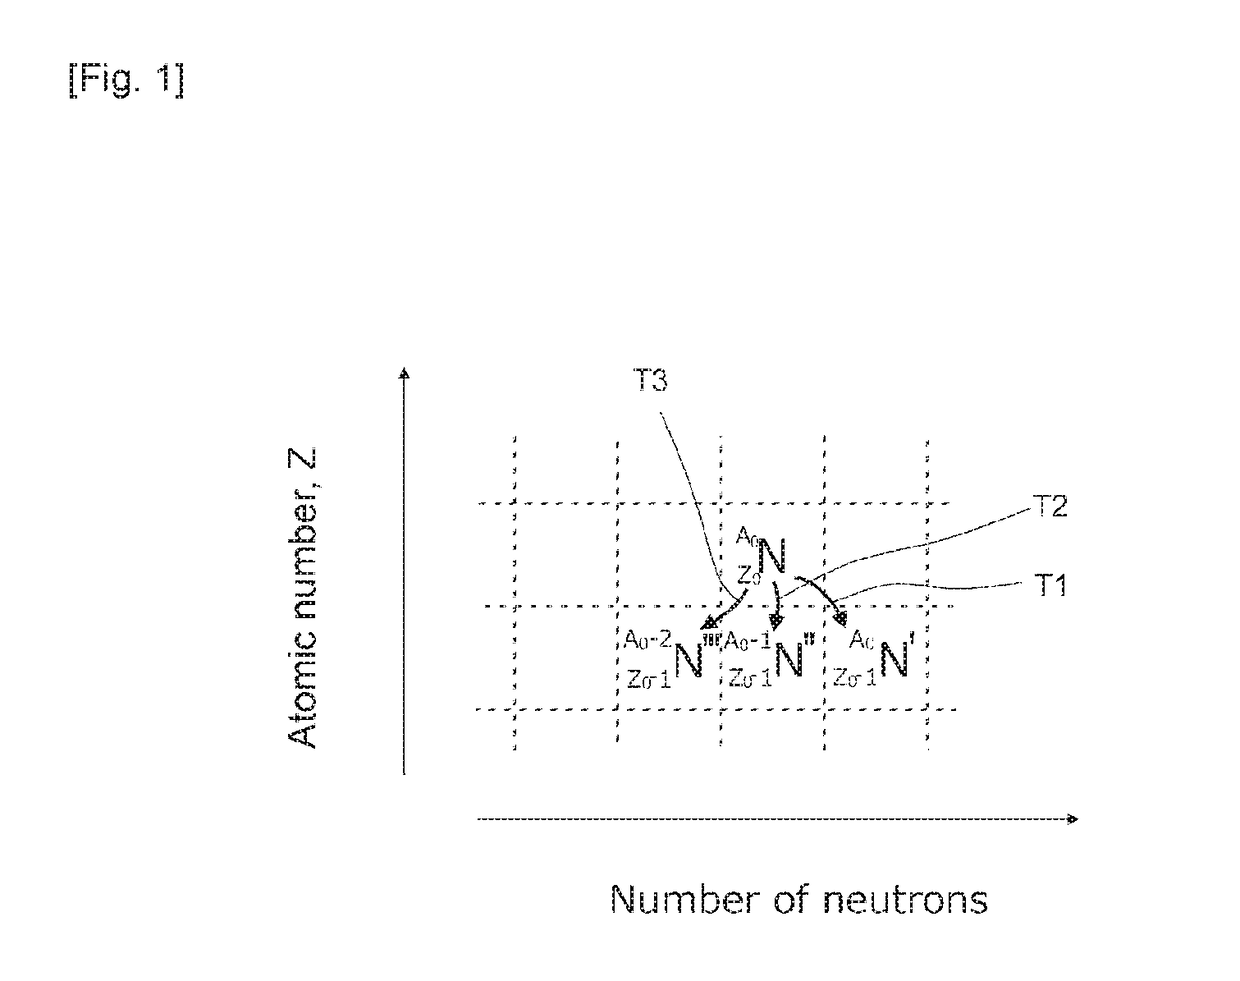 Method for preparing radioactive substance through muon irradiation, and substance prepared using said method